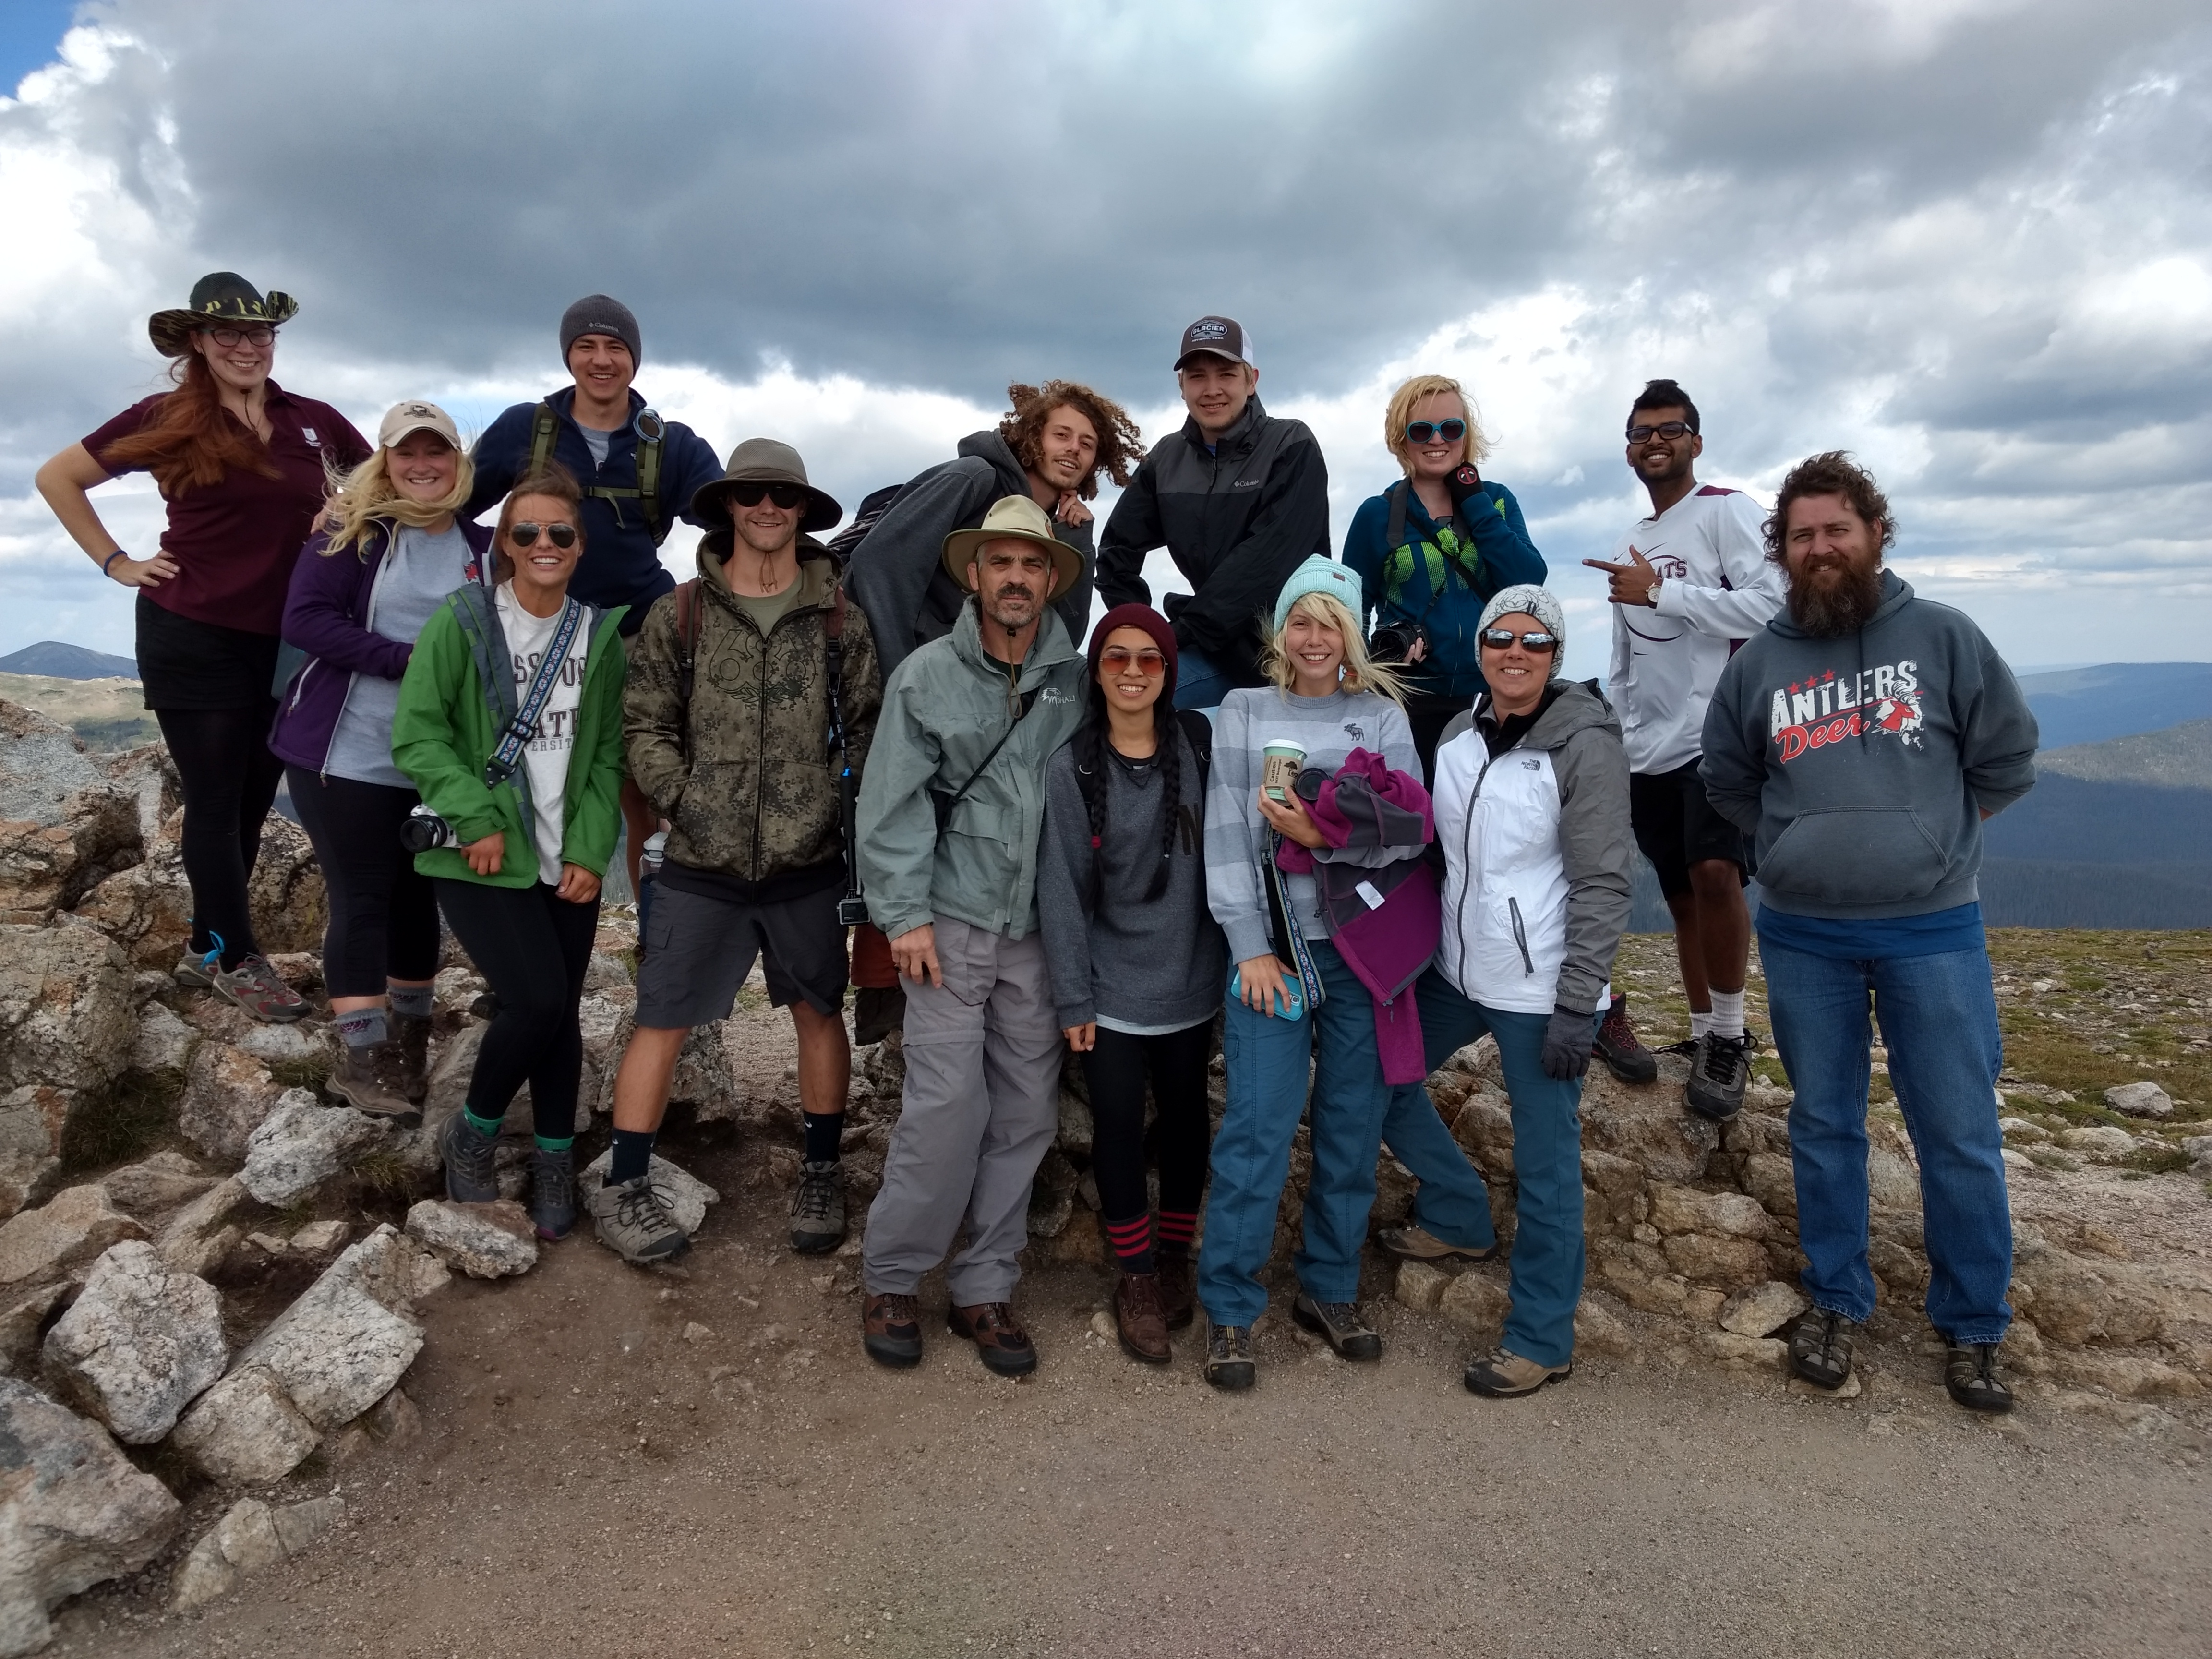 Group photo on the rocky mountains.